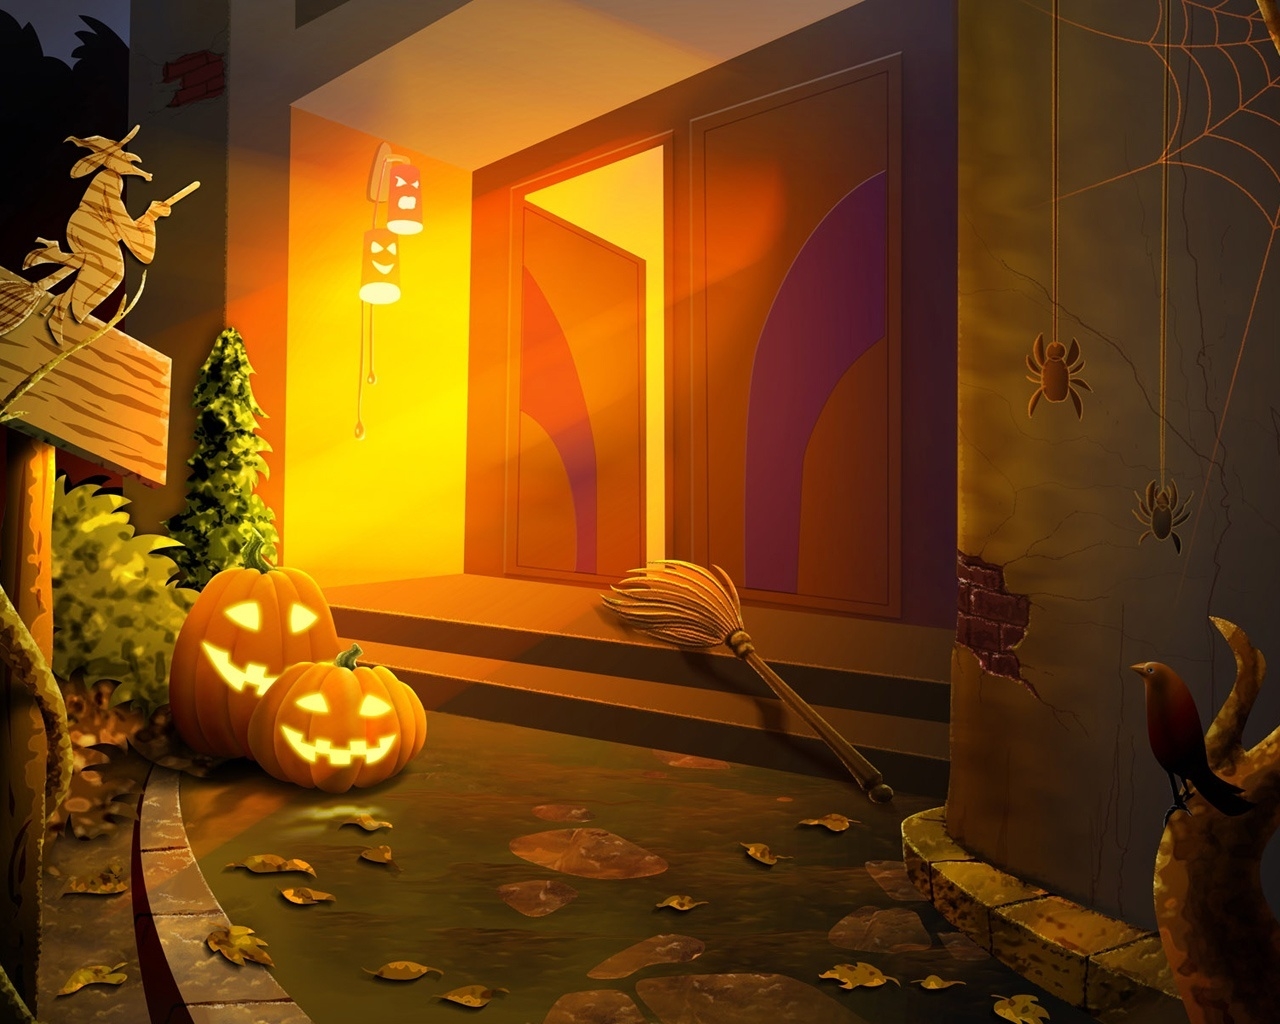 Lights for Haloween for 1280 x 1024 resolution